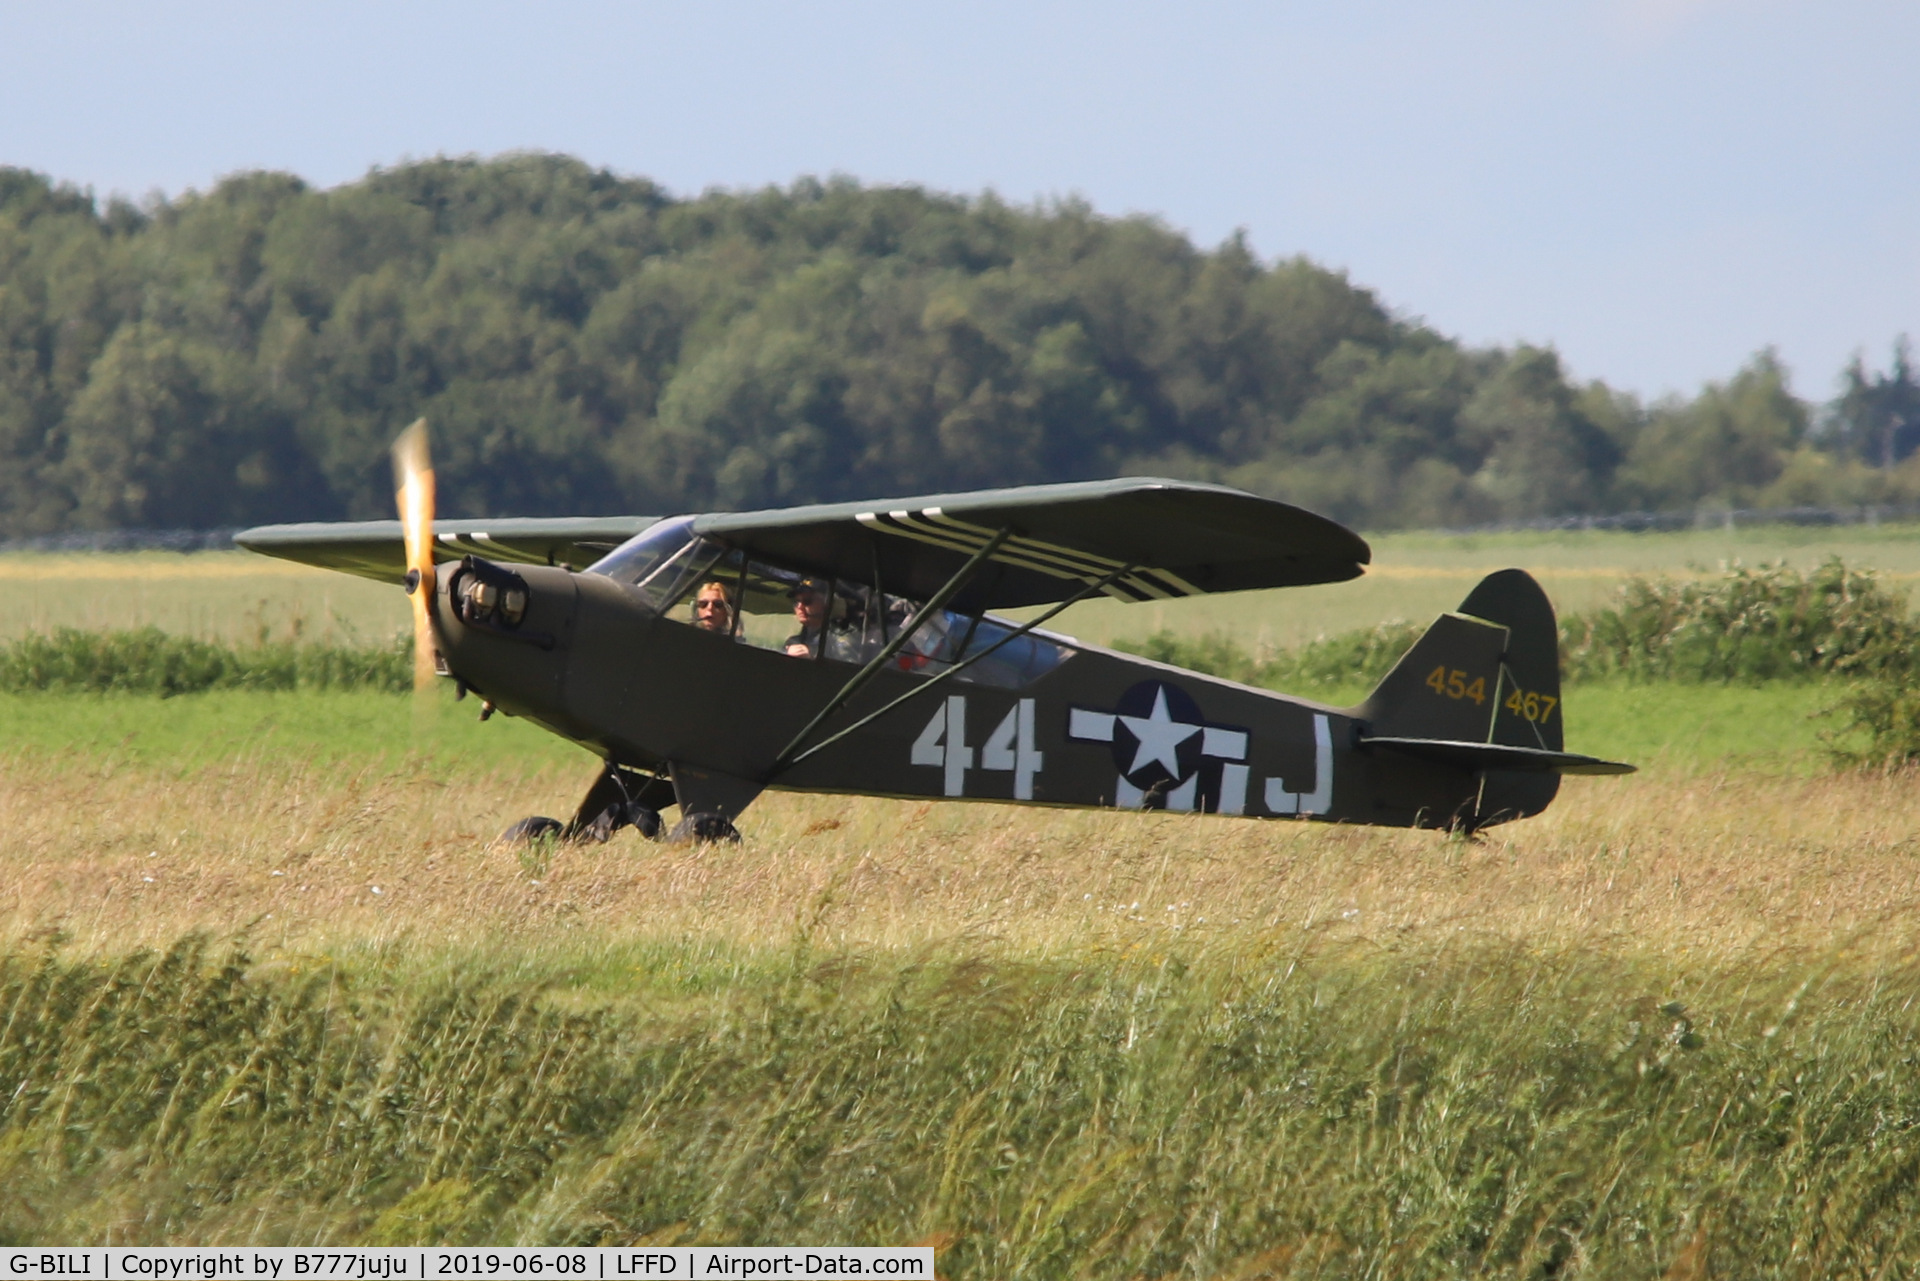 G-BILI, 1948 Piper L-4J Grasshopper (J3C-65D) C/N 13207, L-Birds back to Normandy